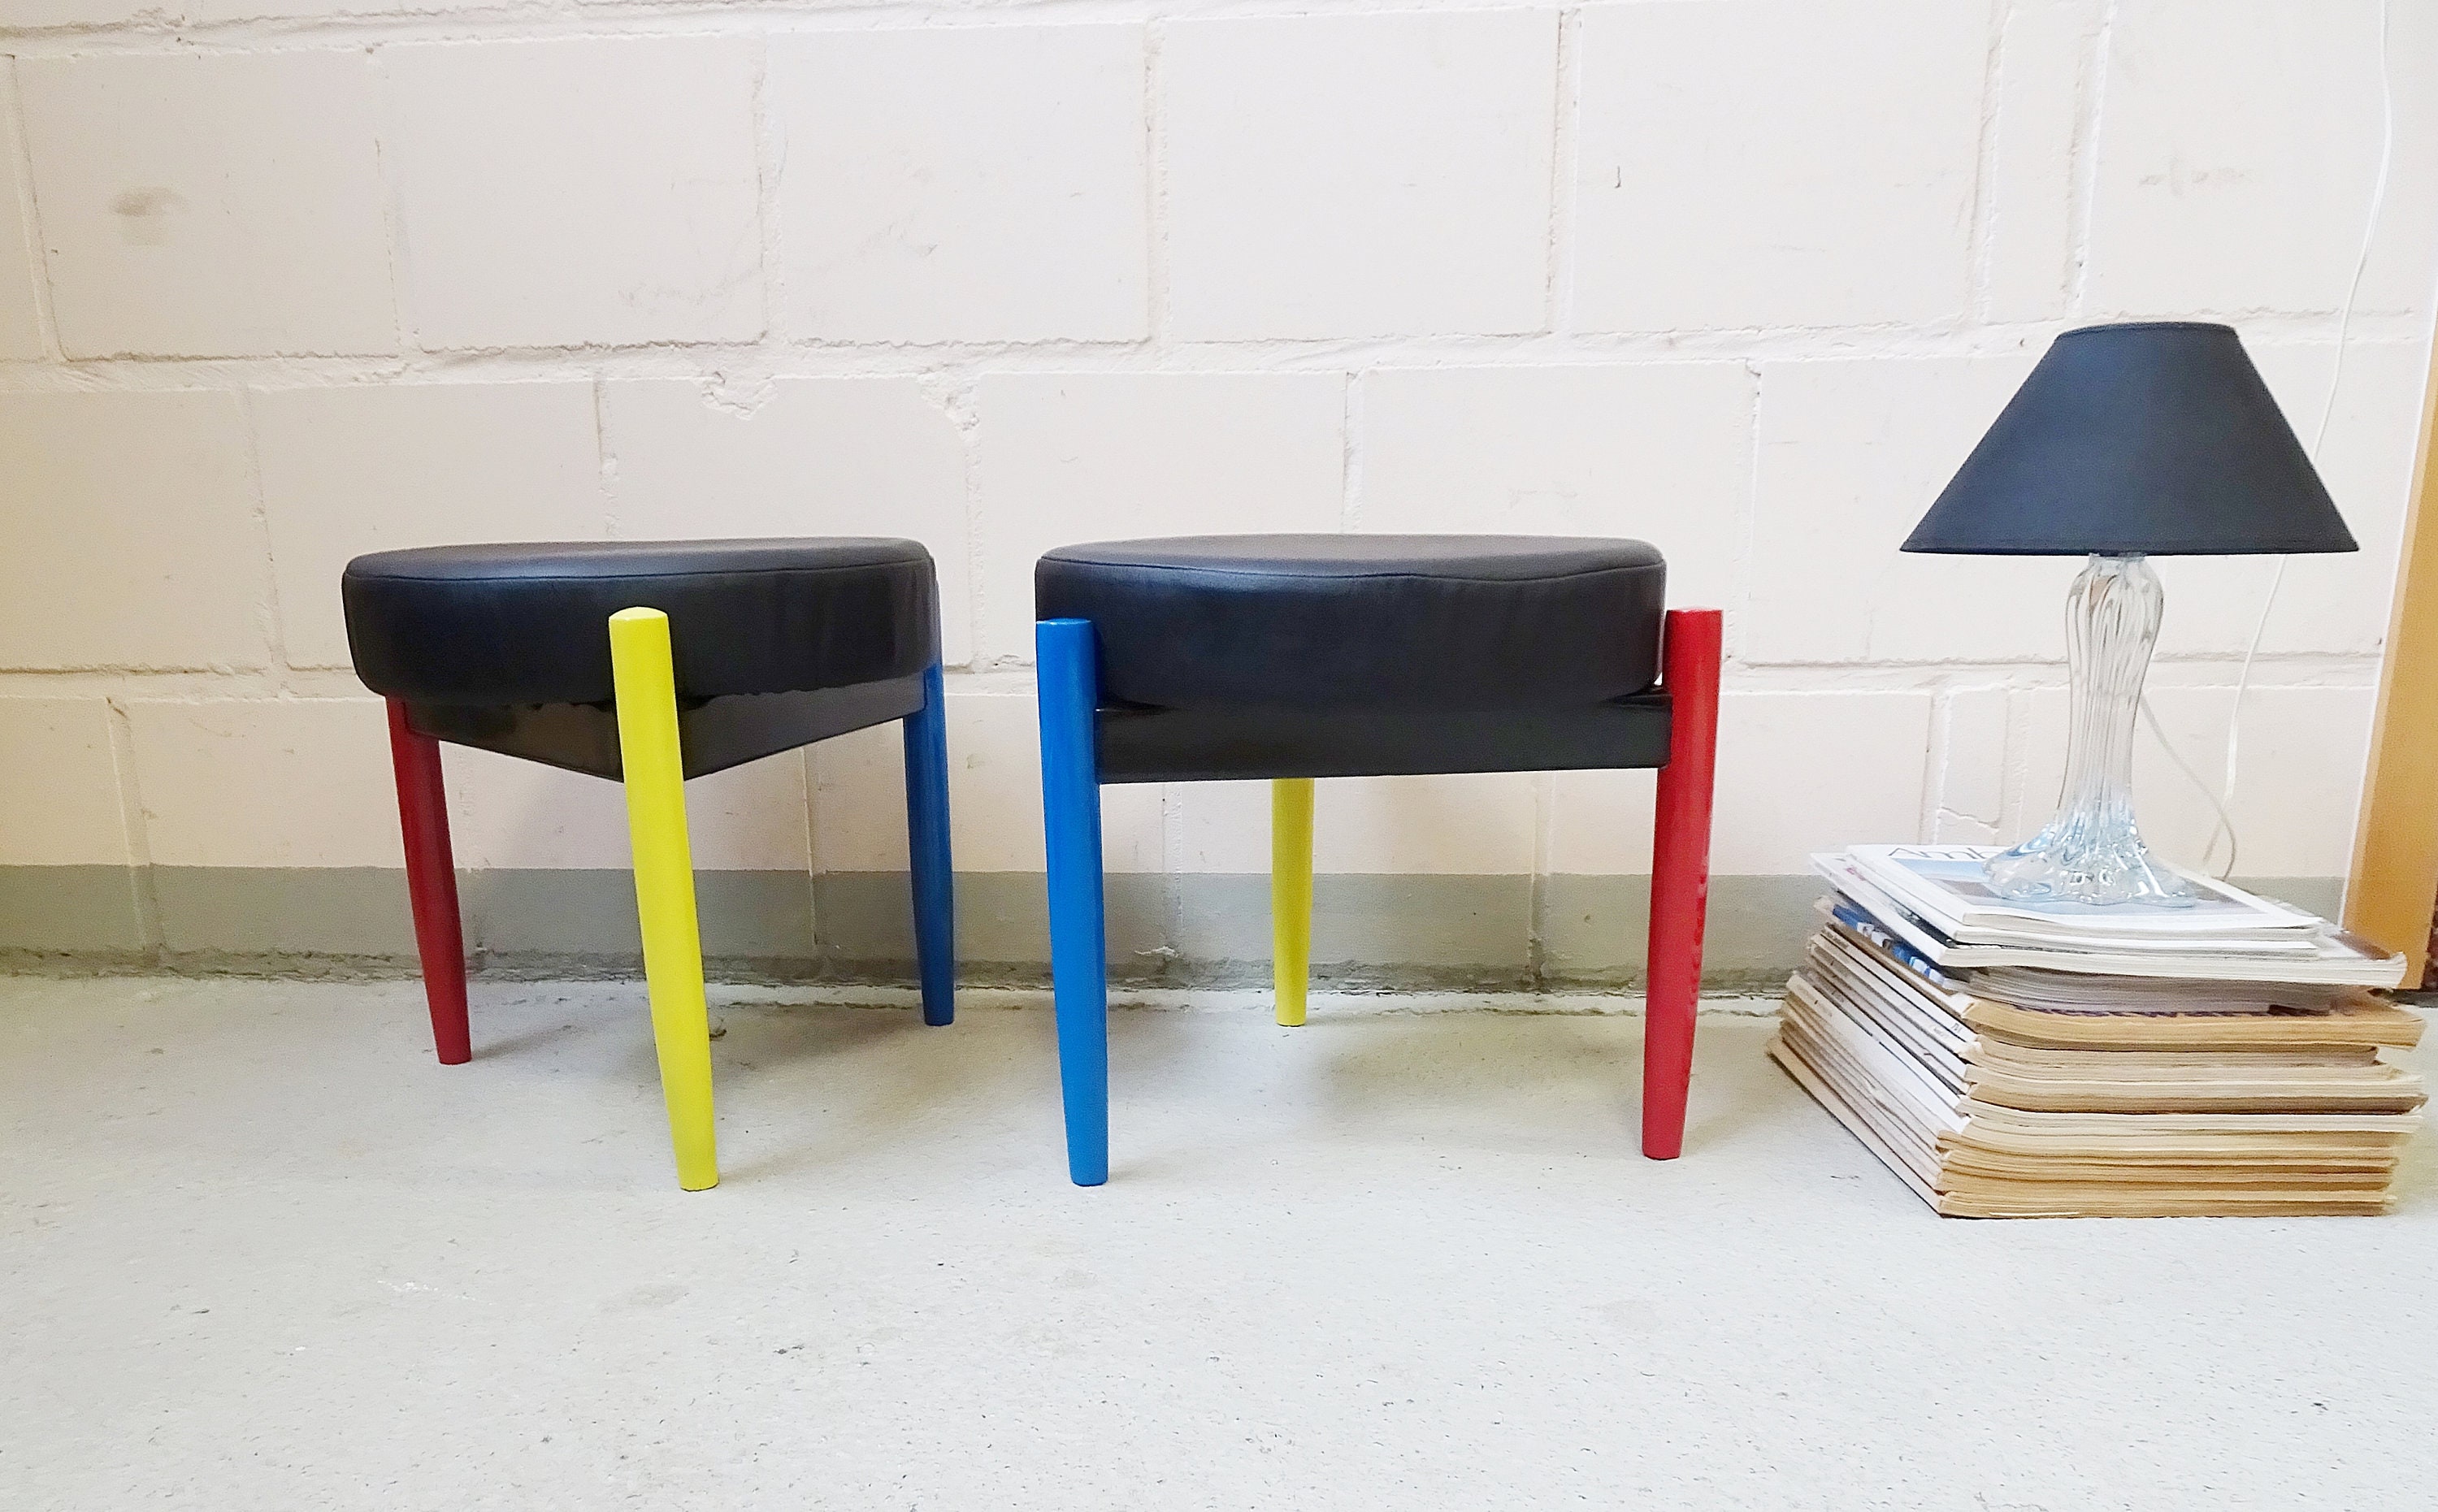 Italian Stool In Memphis Design Stool Set With Leather